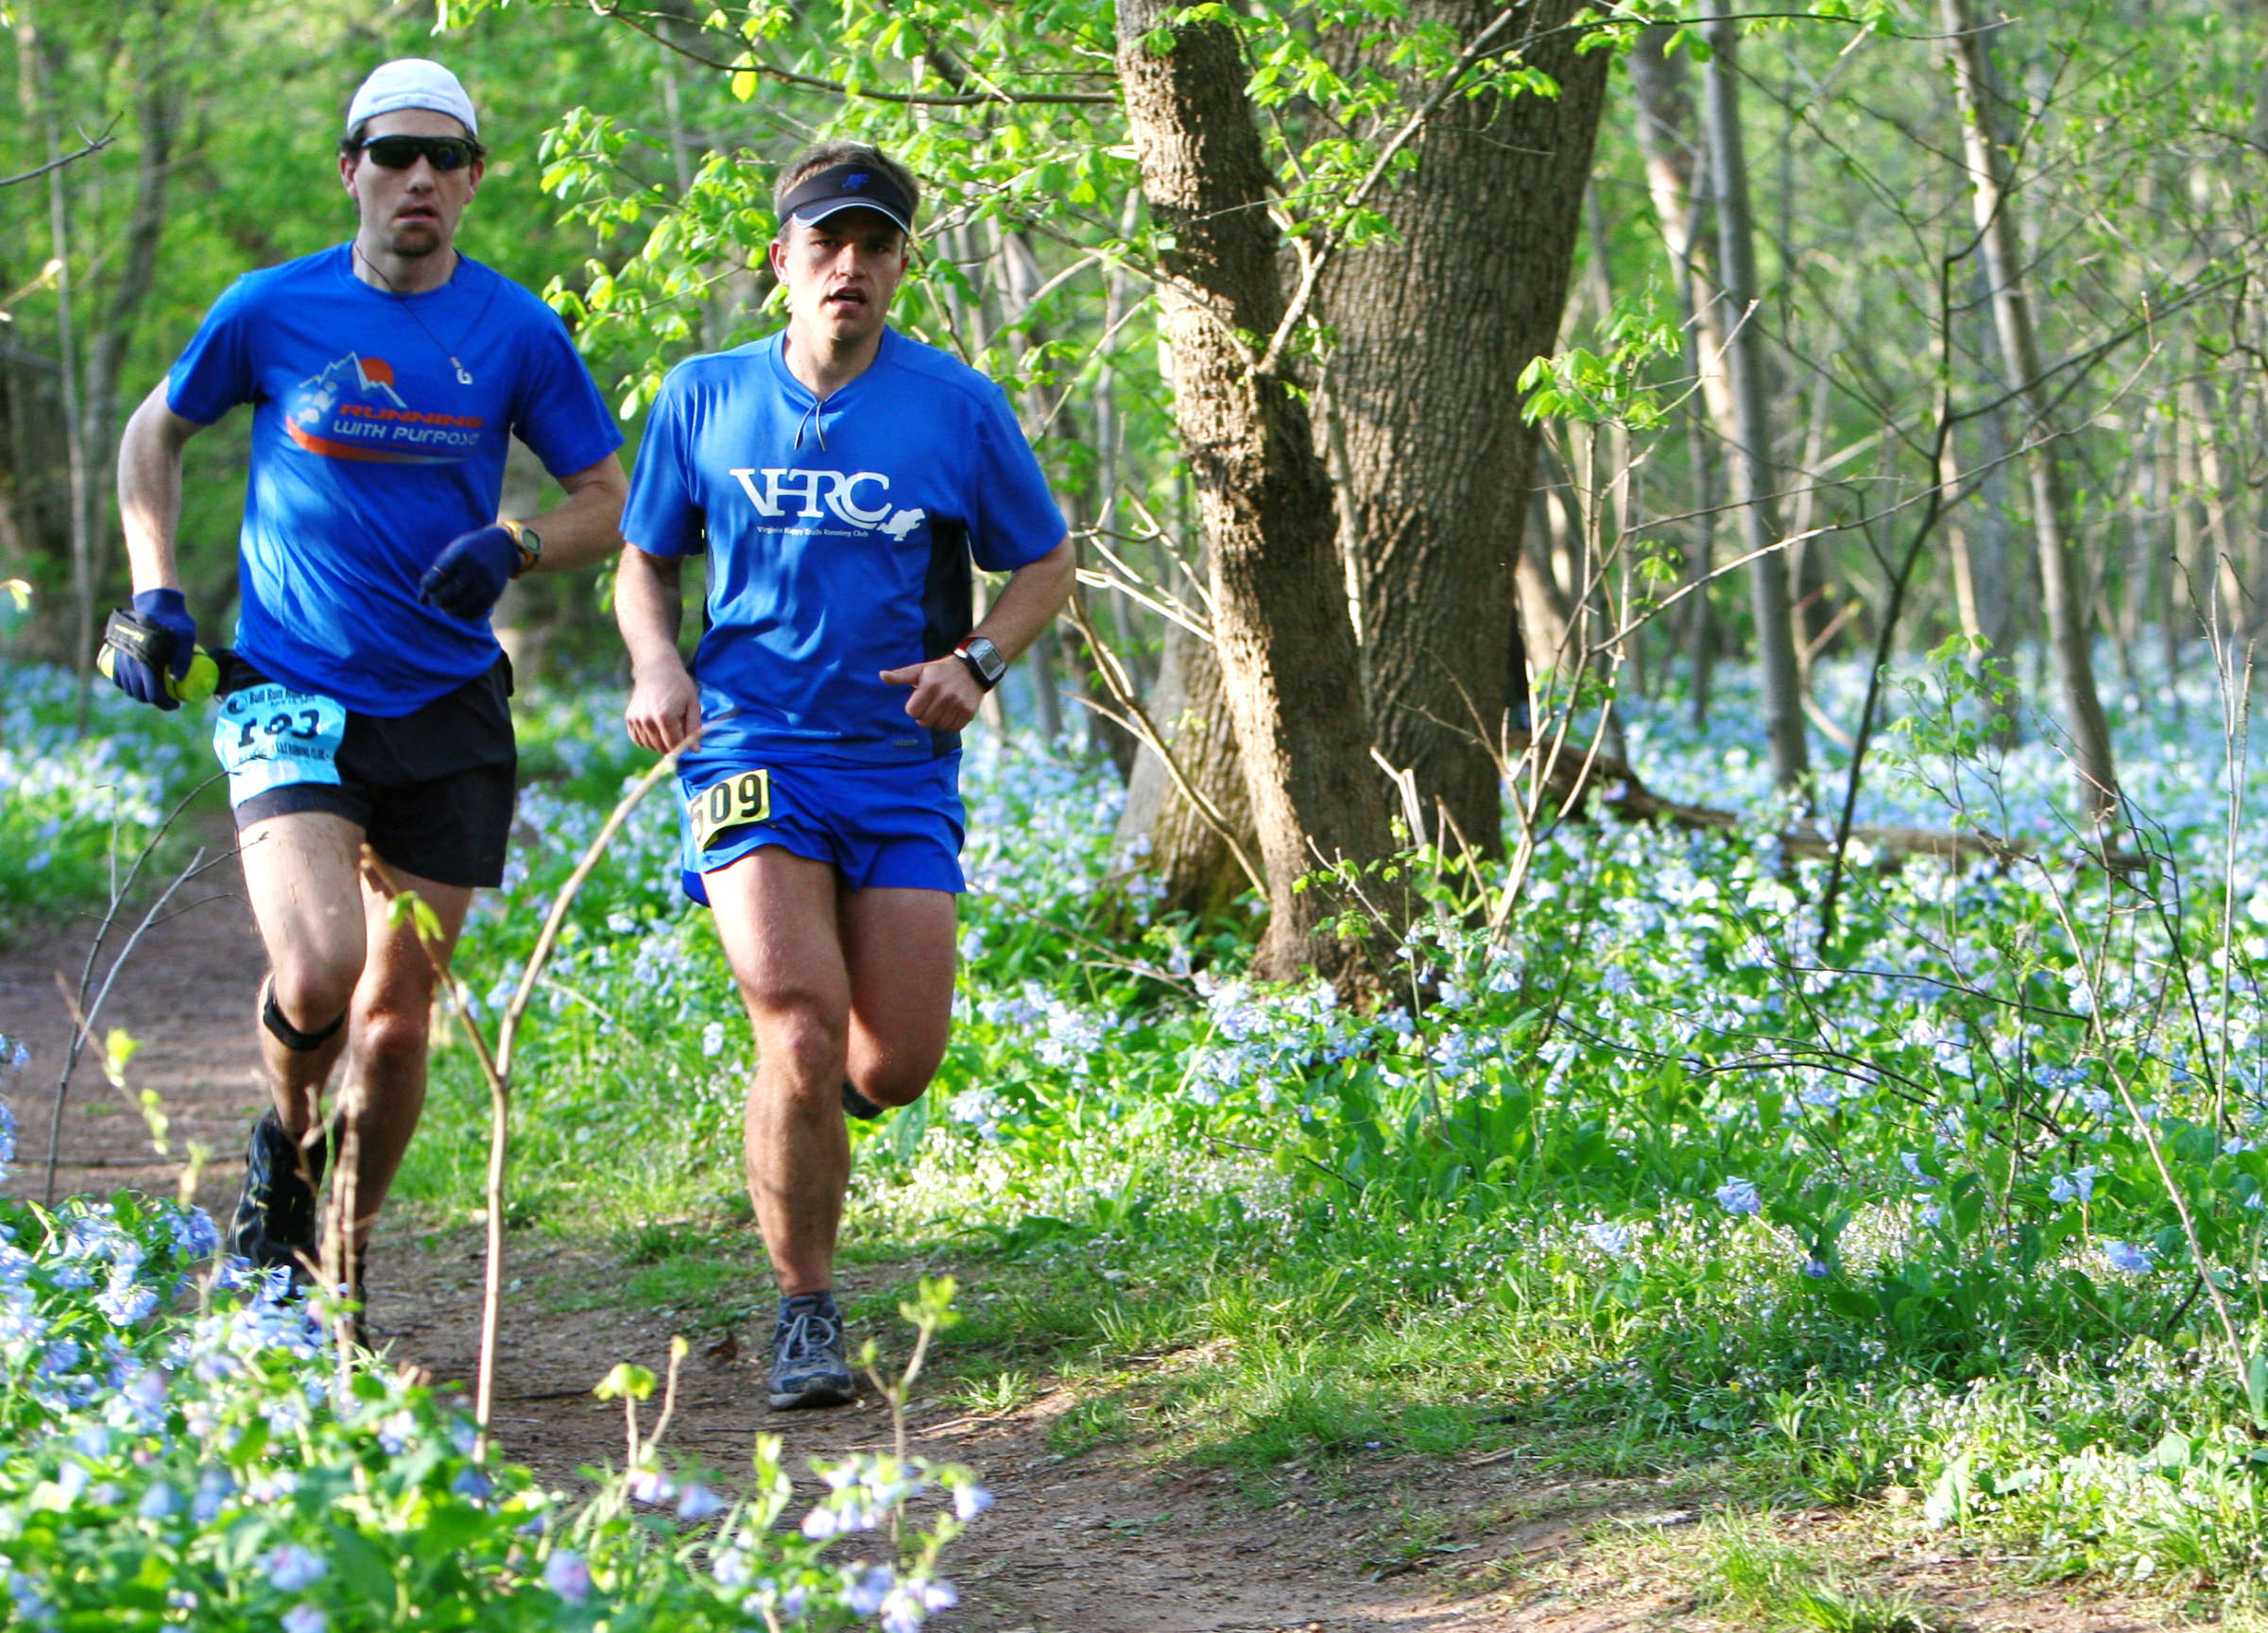 Brad Hinton and Keith Knipling cruise through the bluebells during the early miles of the 2010 BRR.